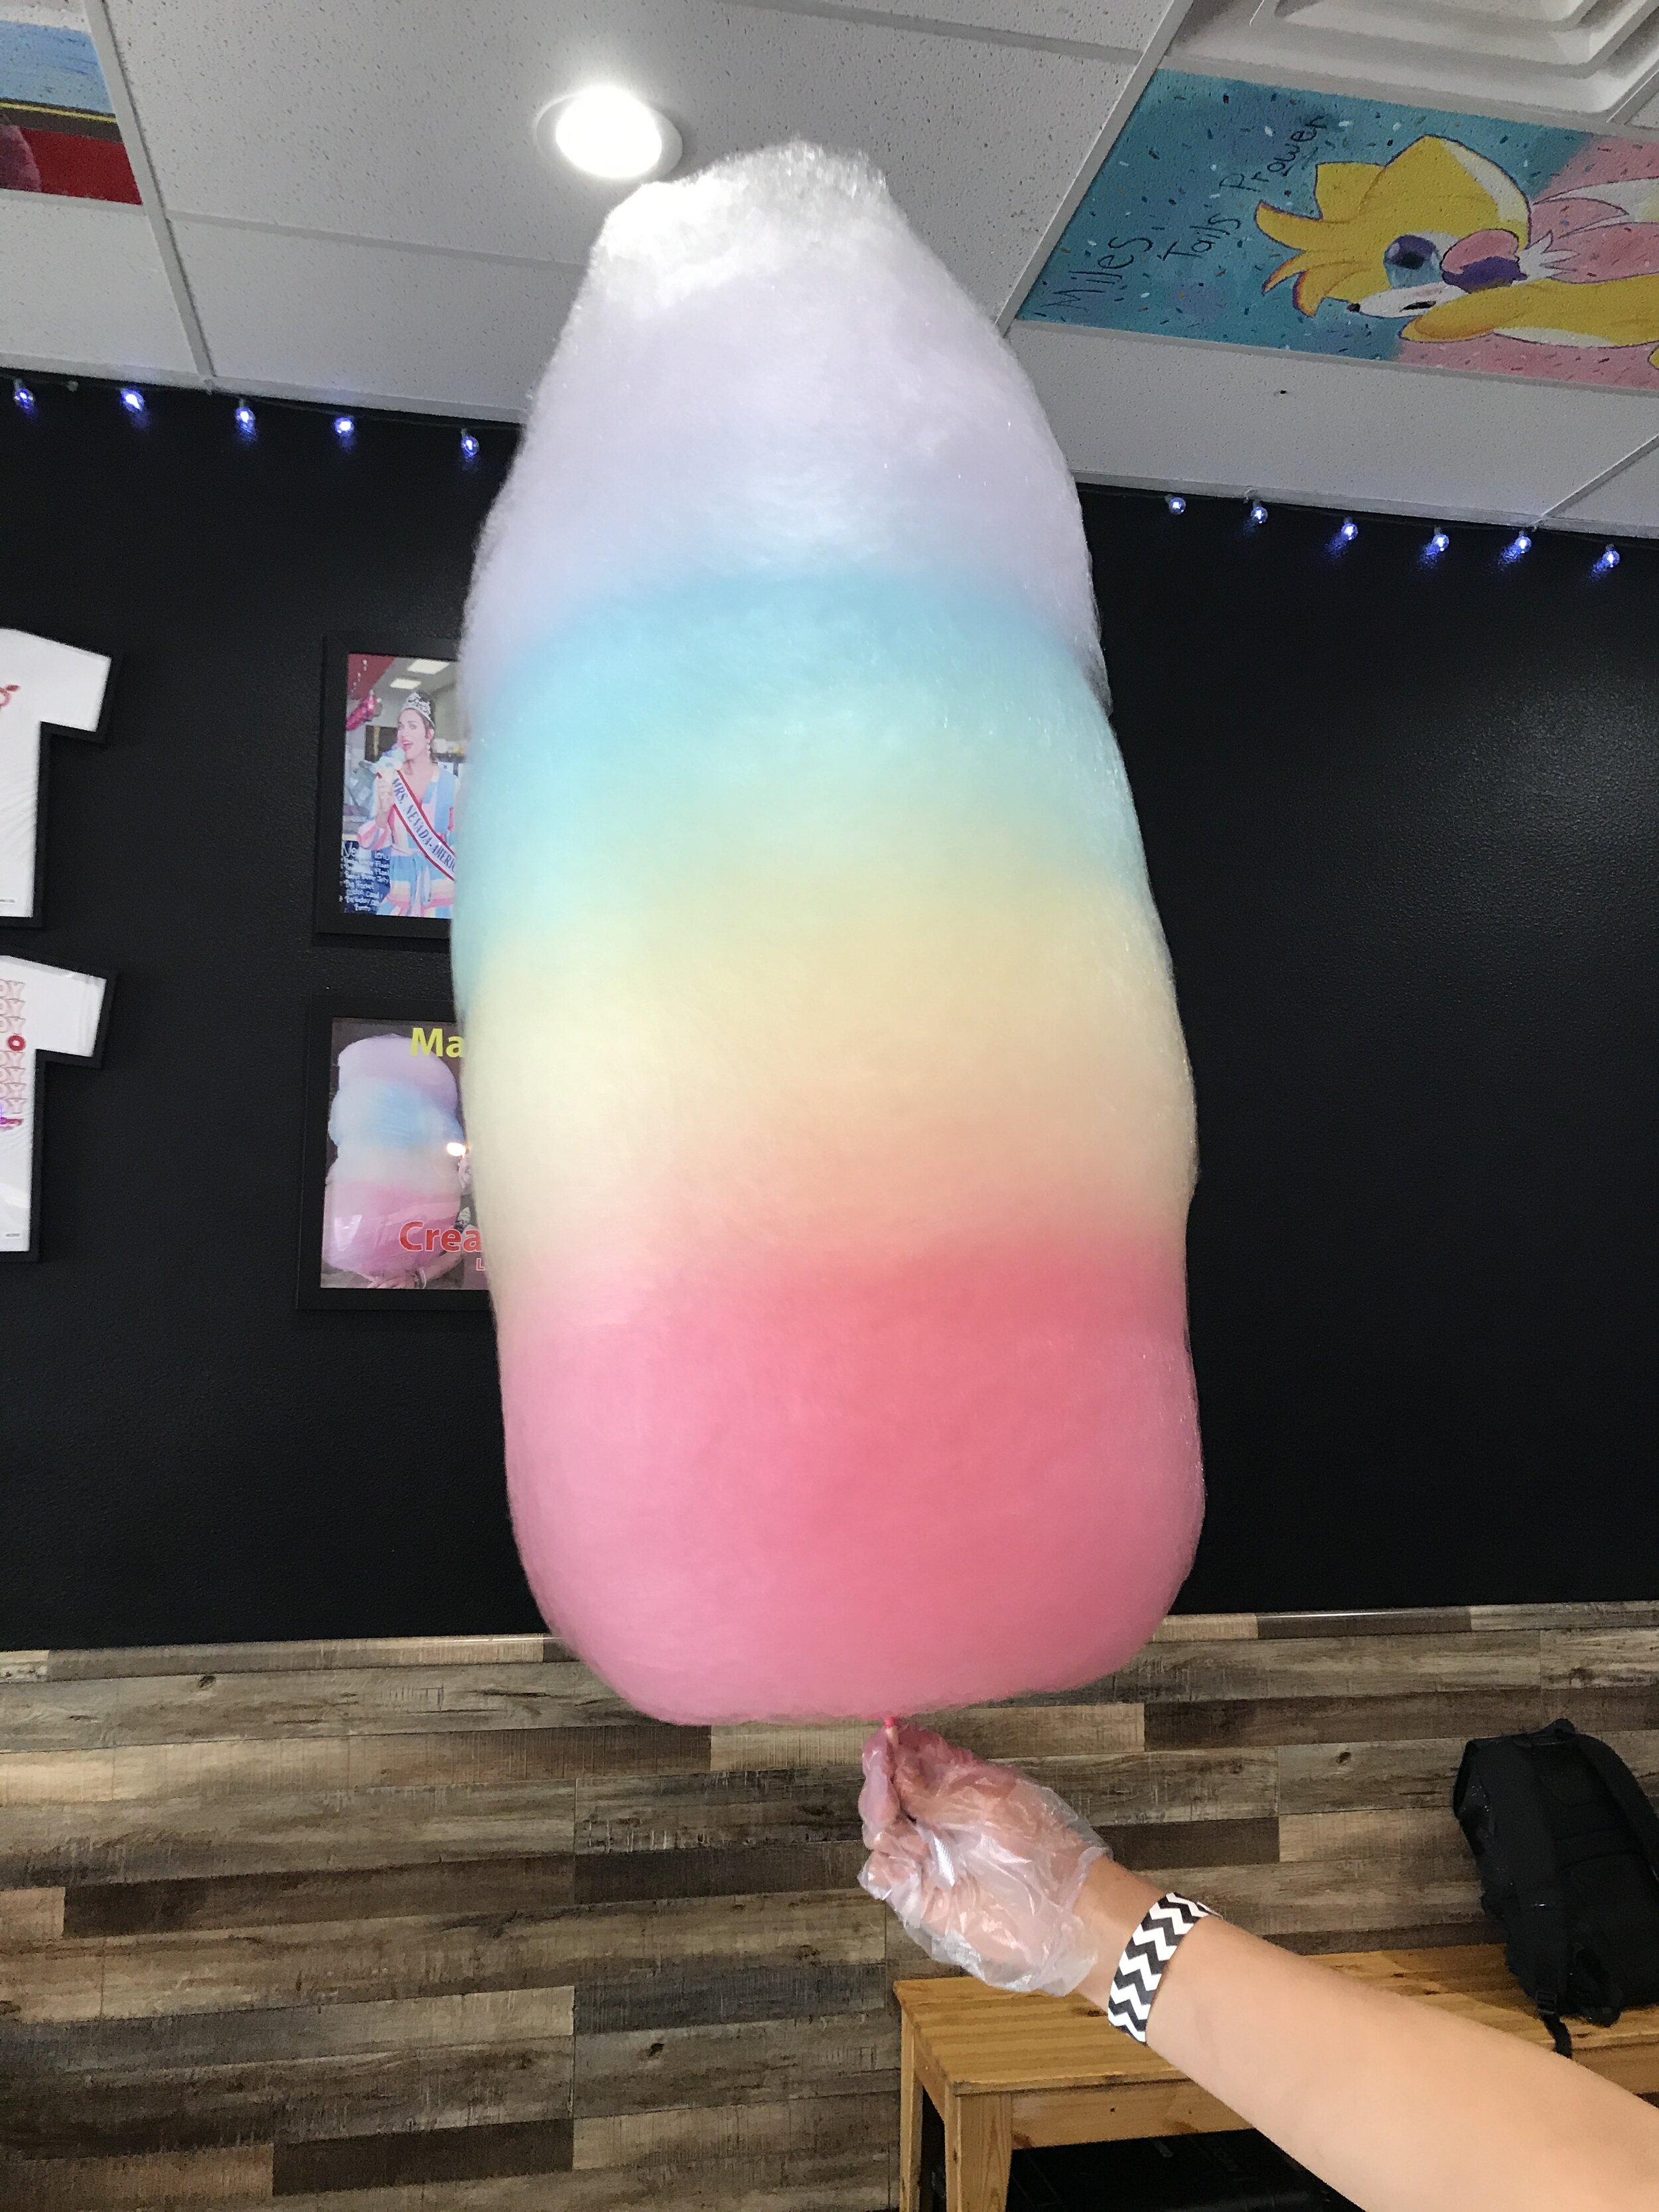 Creamberry Las Vegas Cotton Candy Rocket Is Bigger Than Your Torso